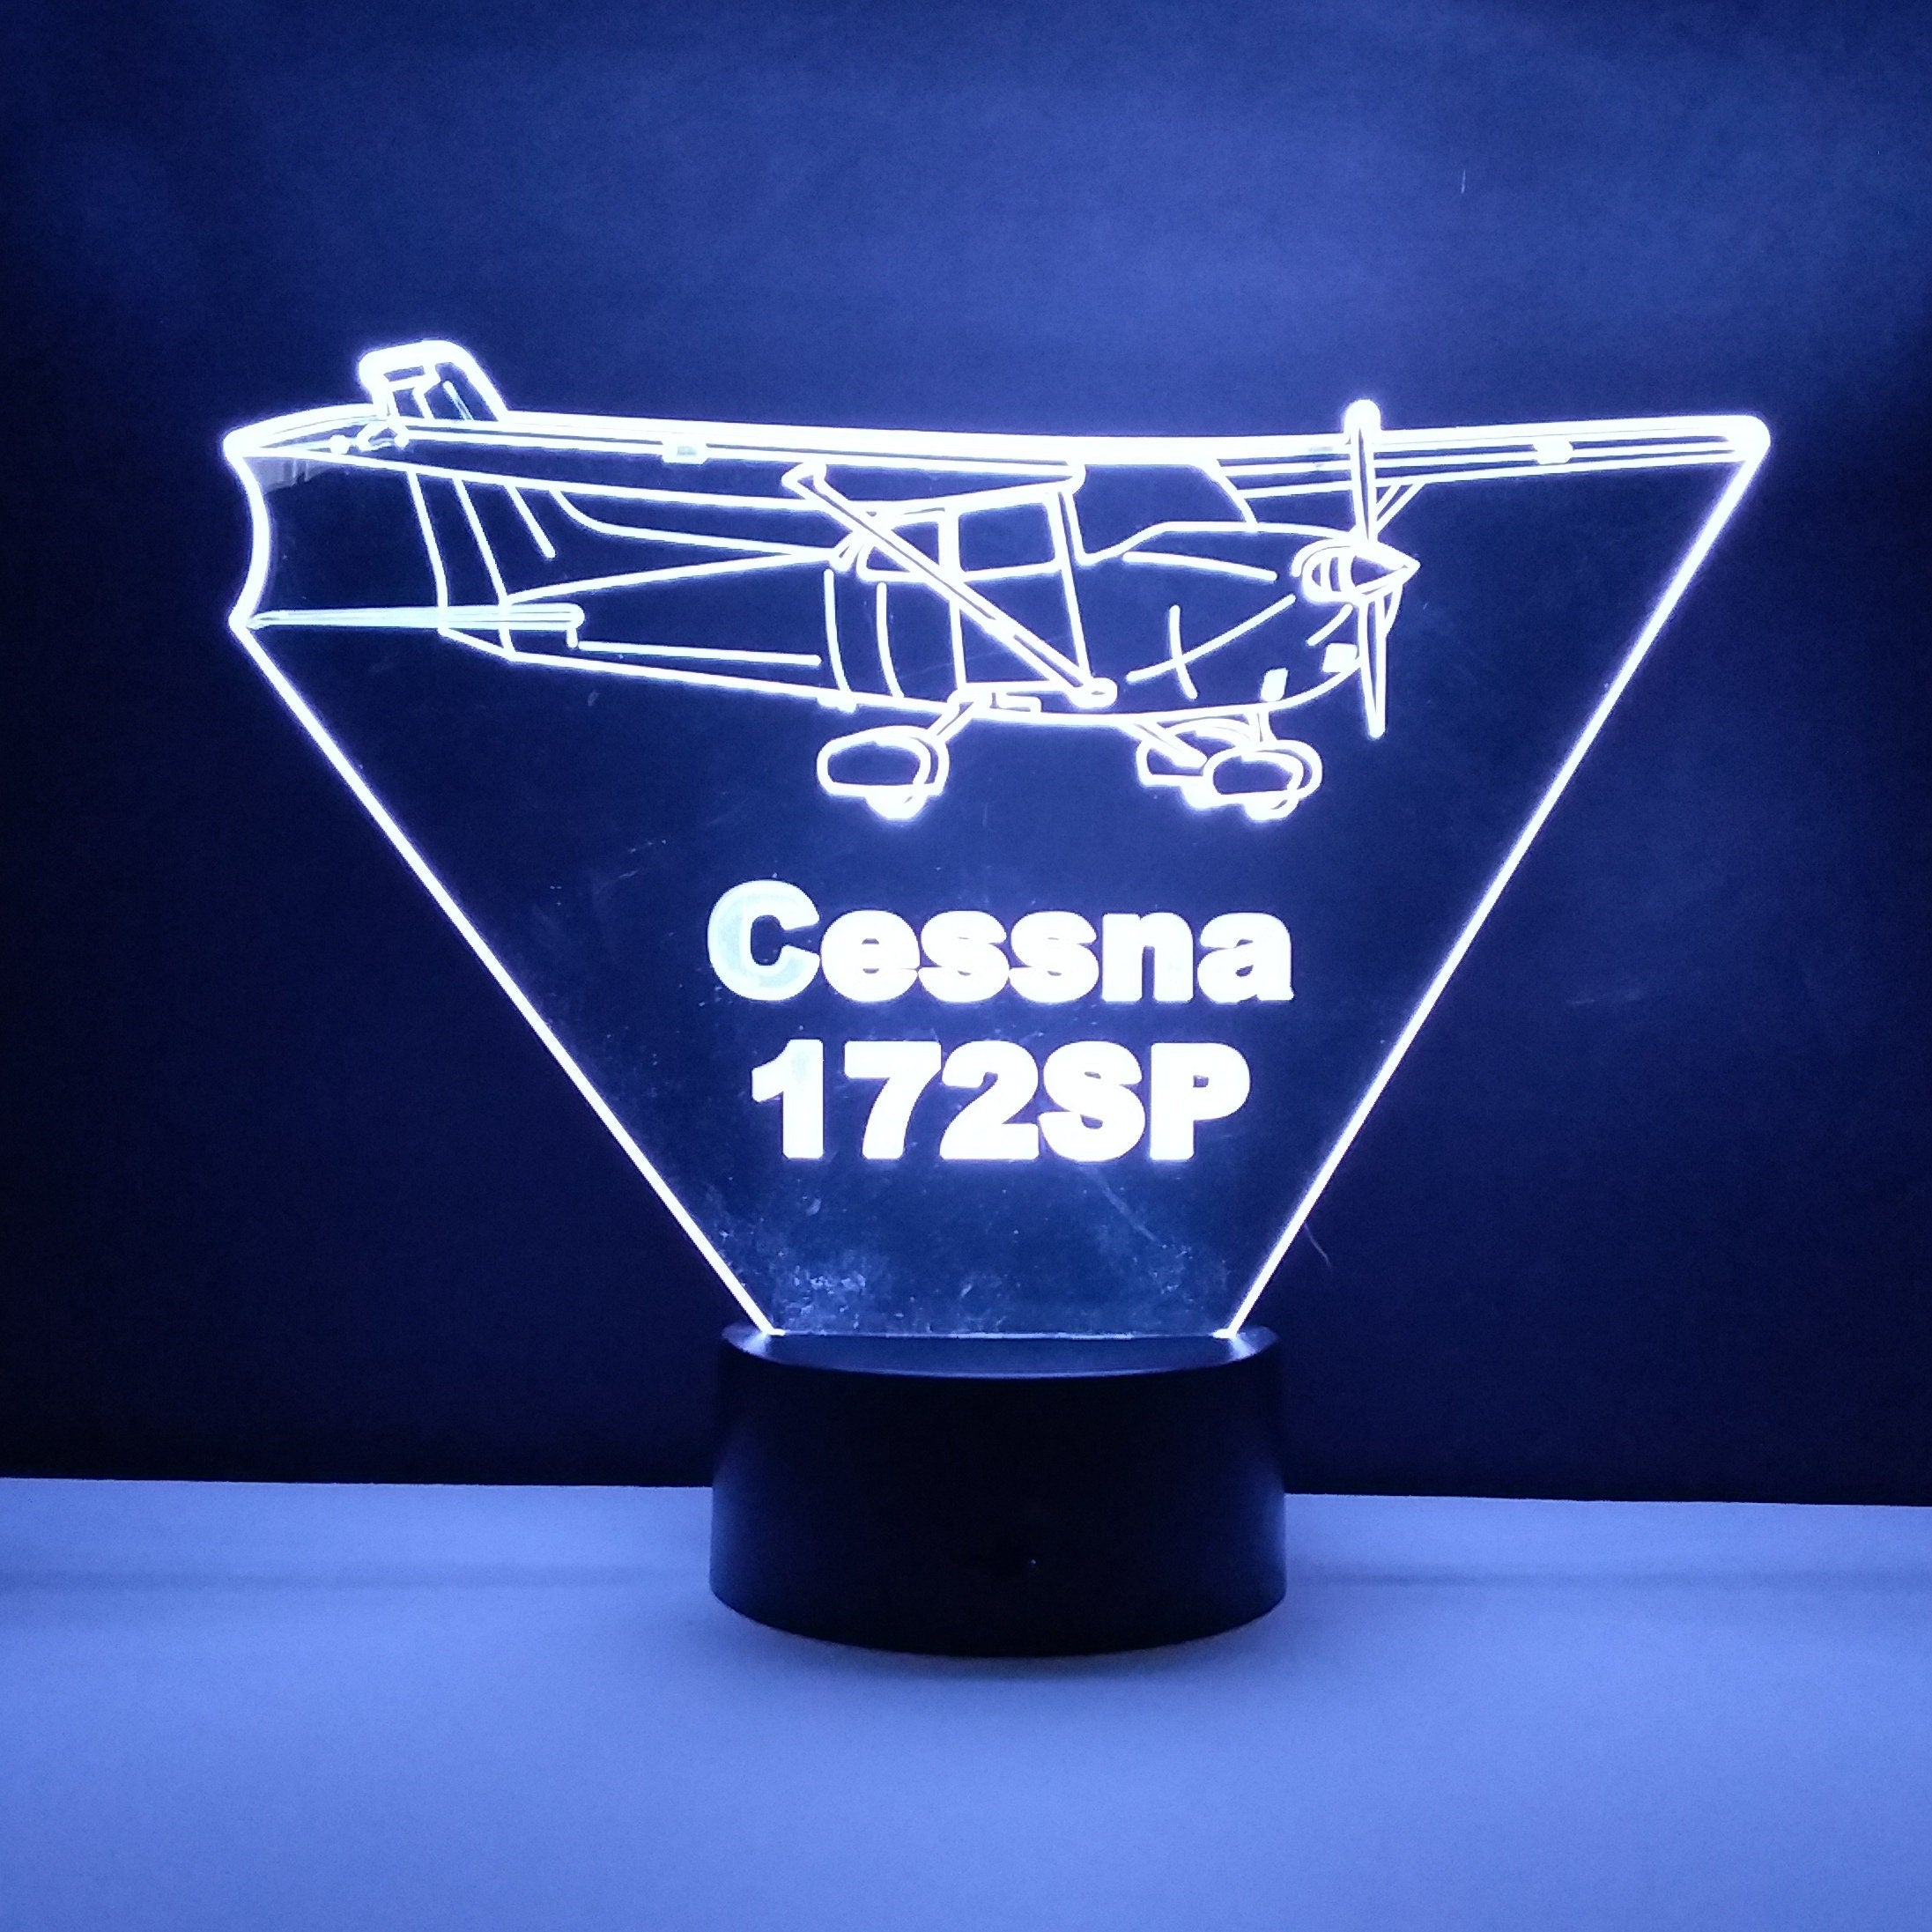 Awesome "Cessna 172SP Airplane" 3D LED Lamp (1180) - FREE SHIPPING!